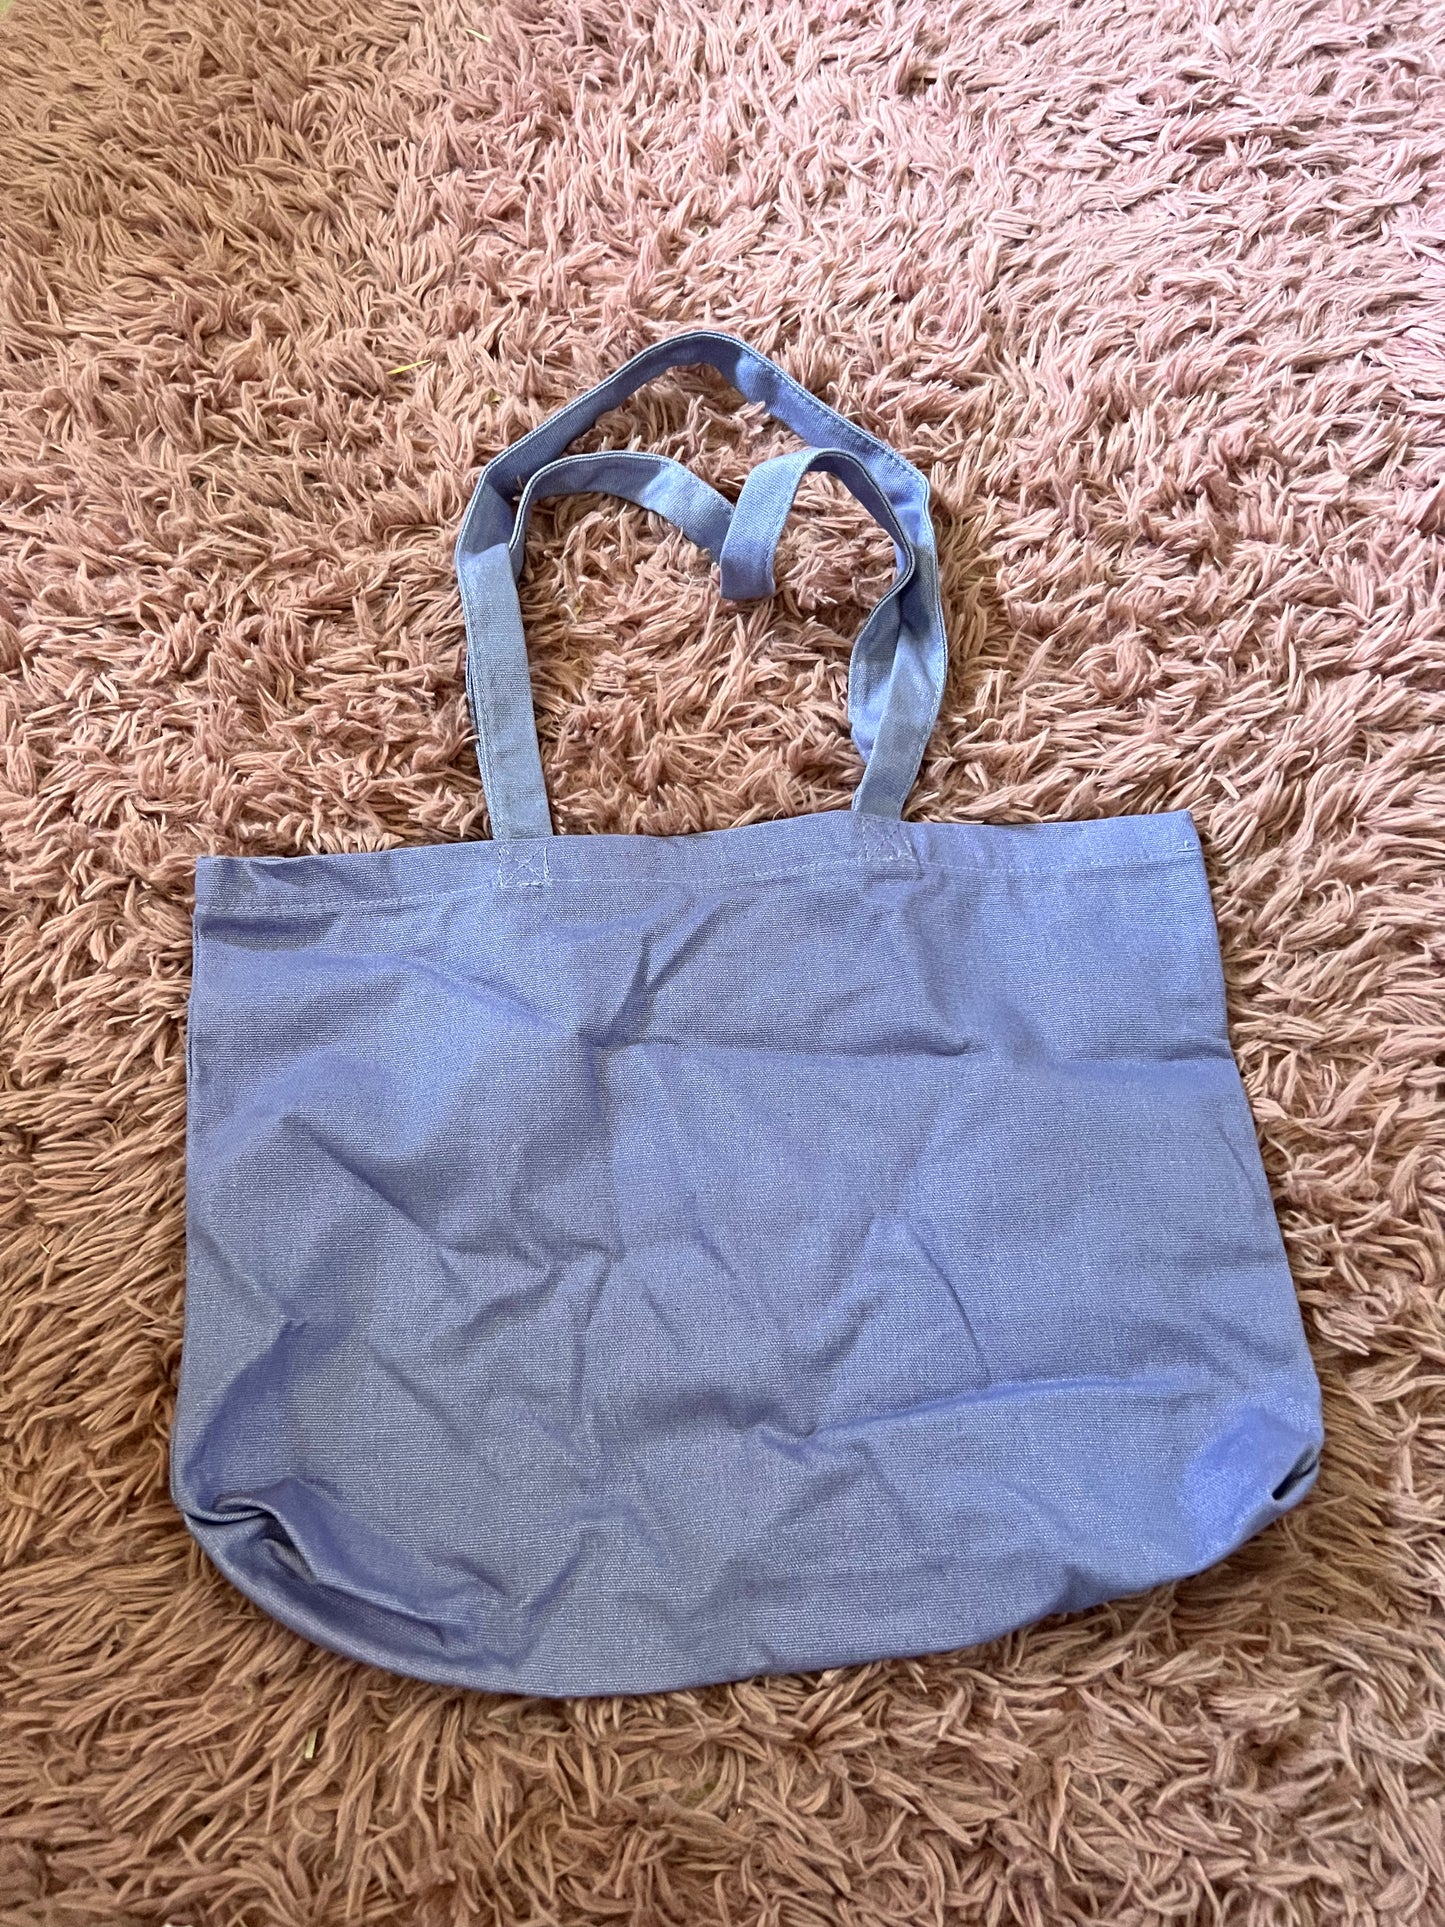 CLEARANCE! Purple Canvas Tote